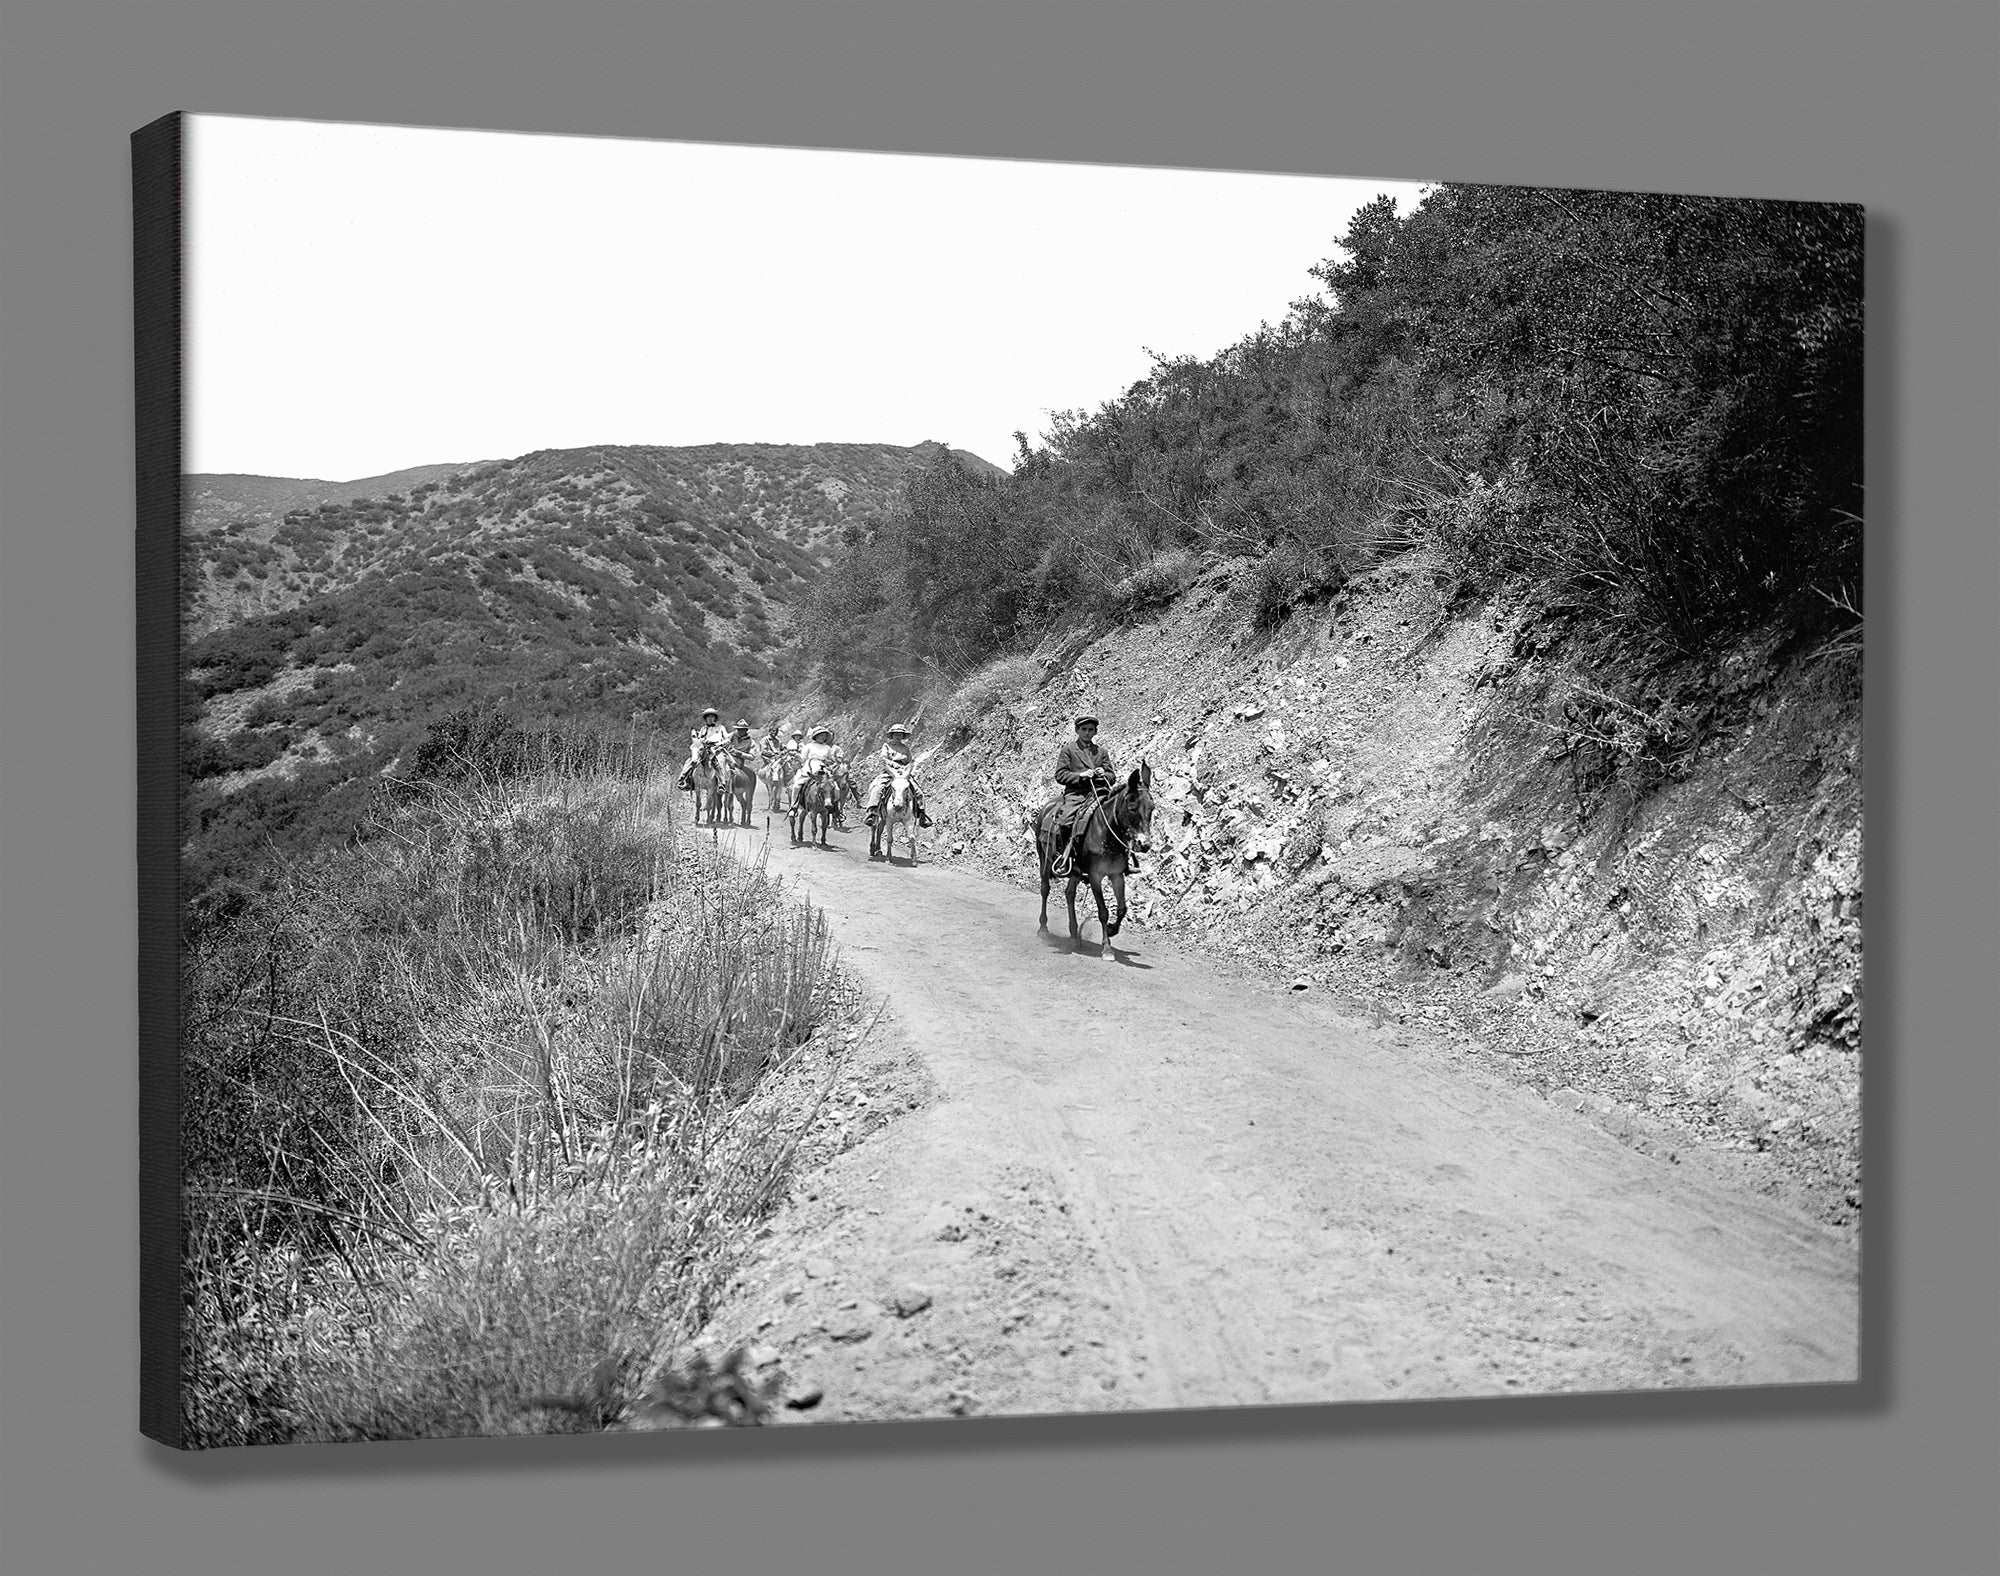 A canvas reproduction print of a vintage photograph of people on horseback on a trail